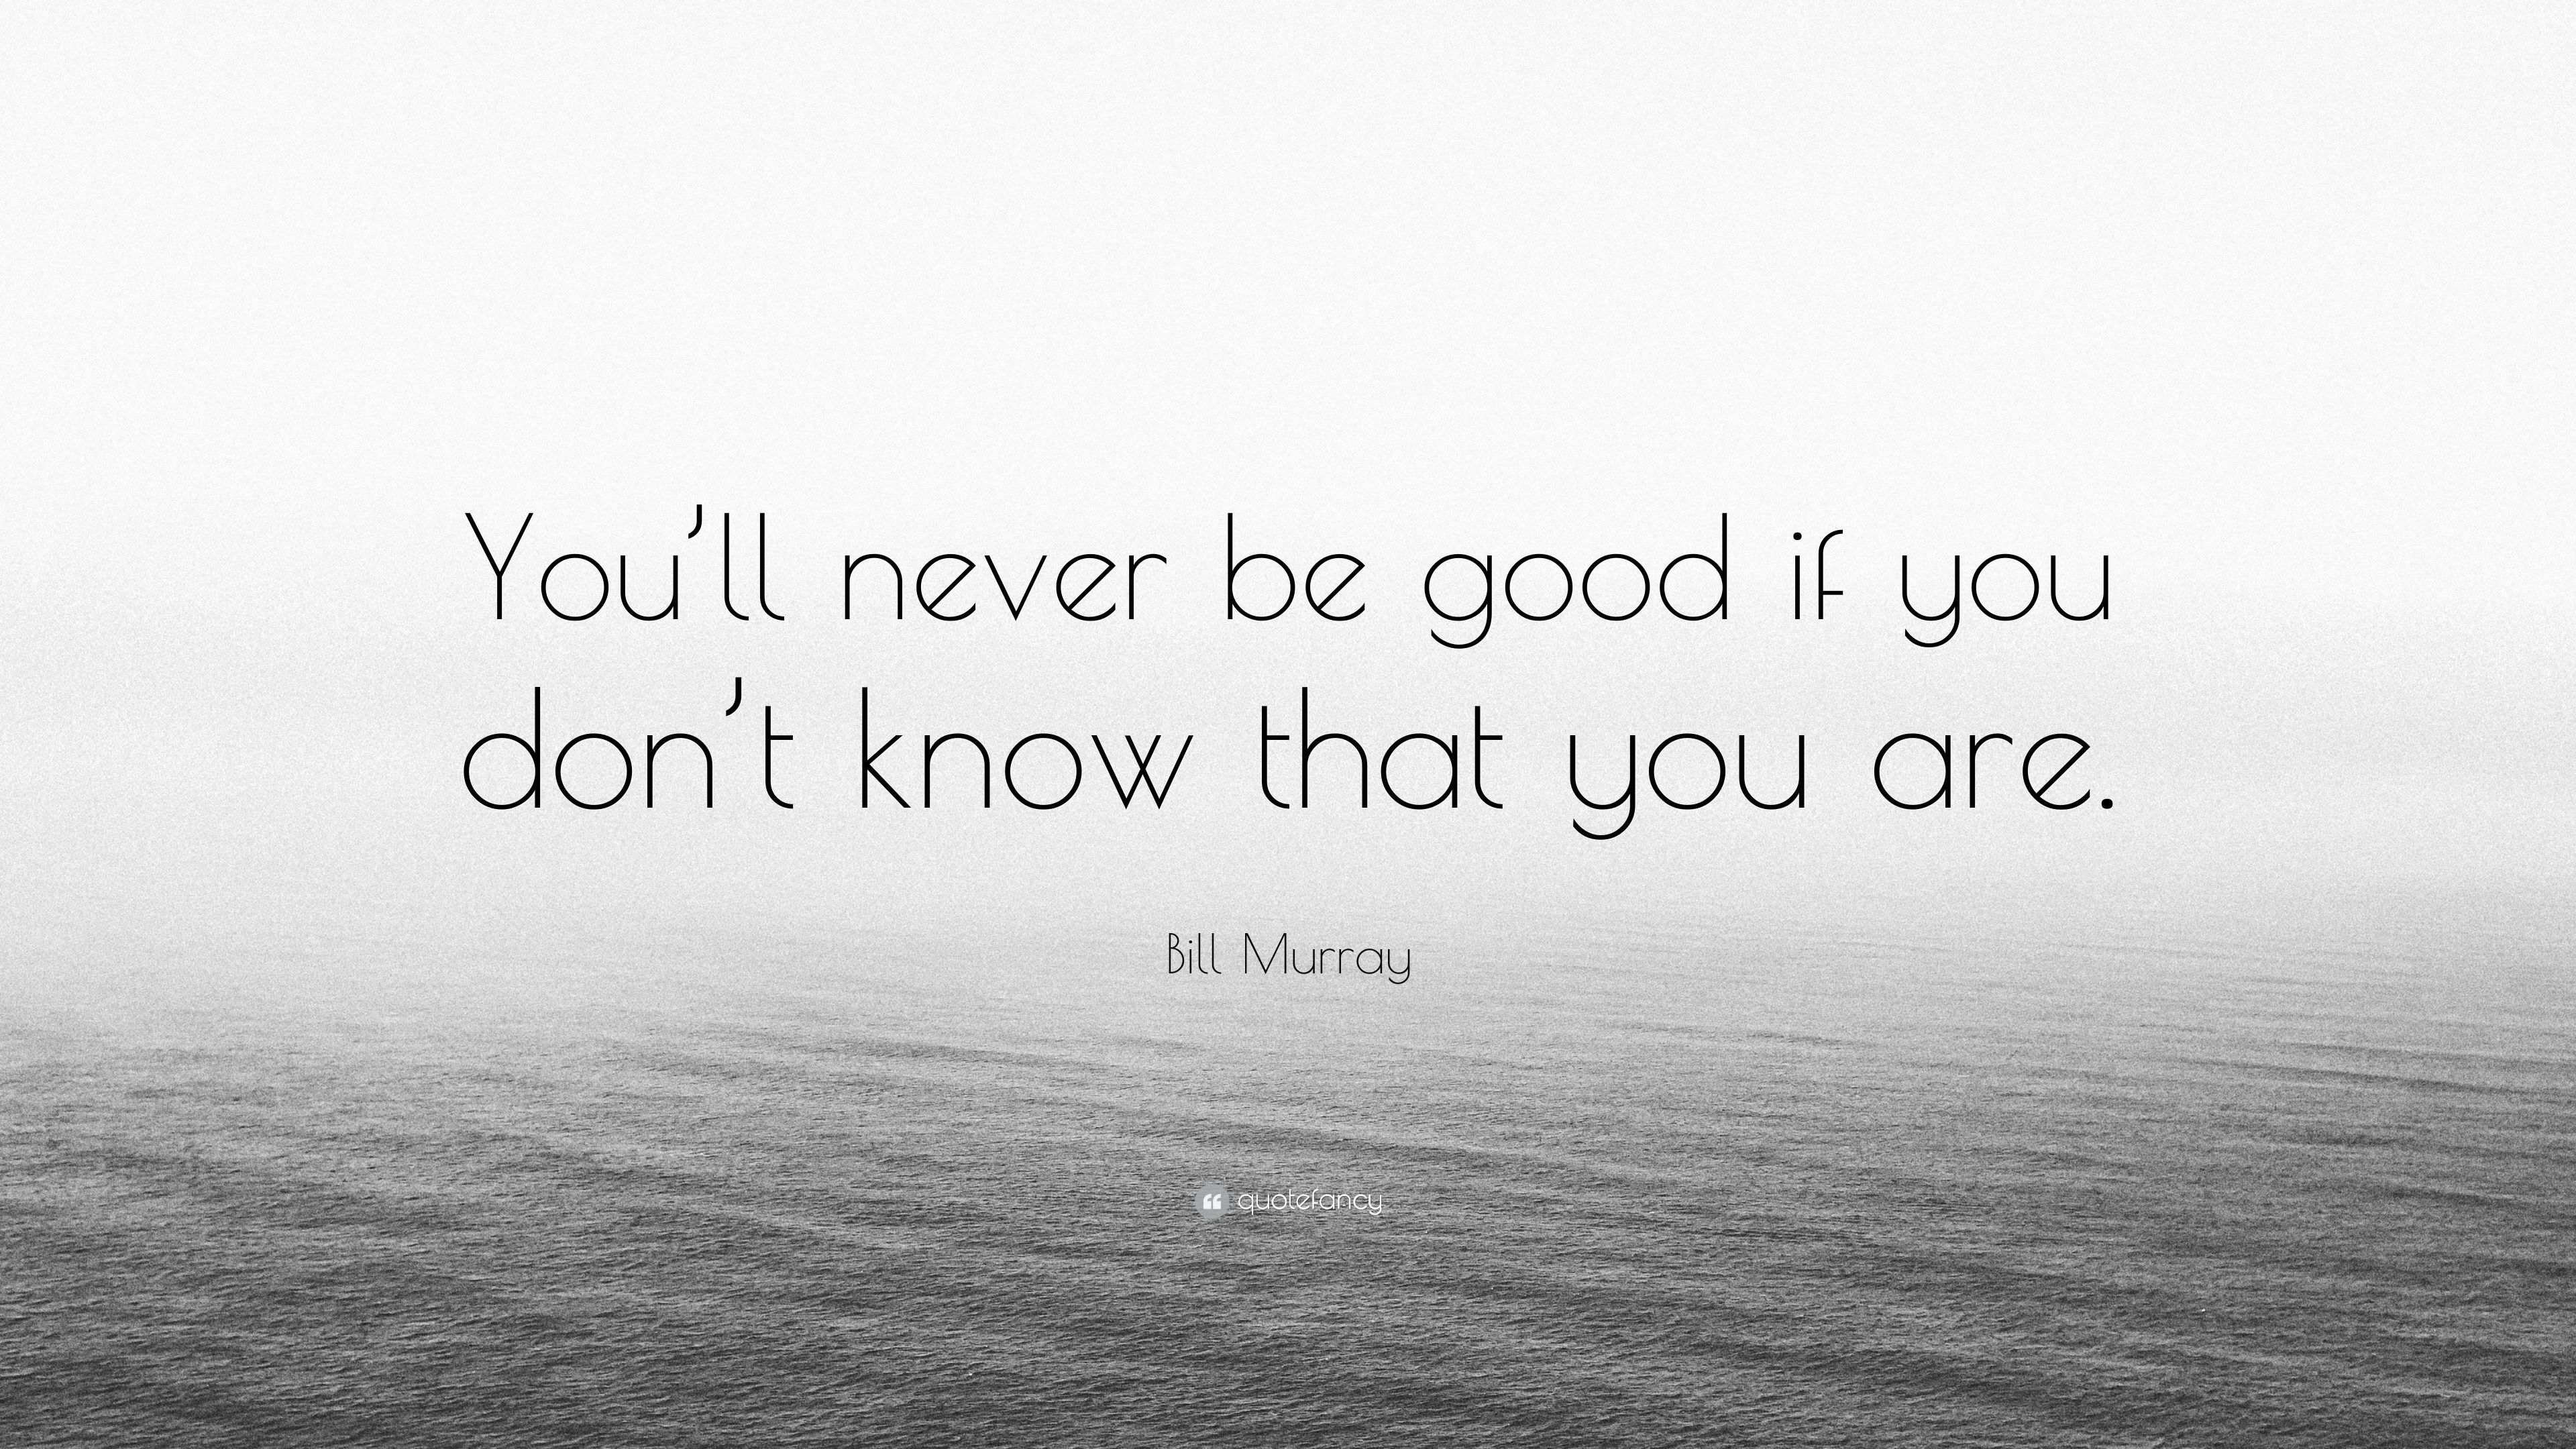 Bill Murray Quote: "You'll never be good if you don't know t...